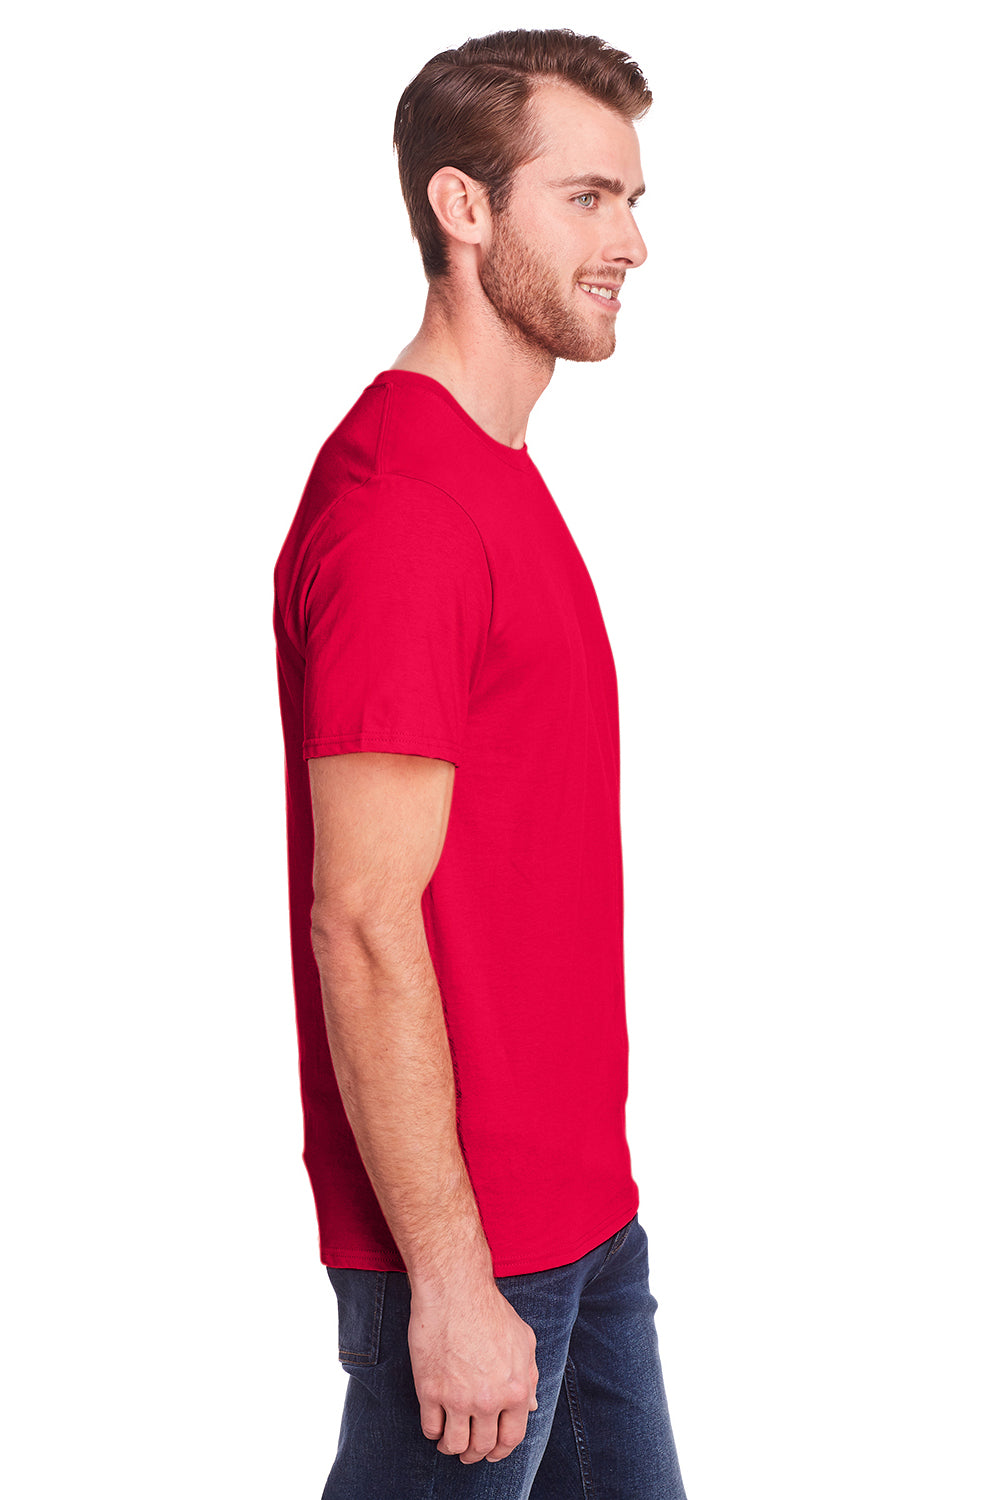 Fruit Of The Loom IC47MR Mens Iconic Short Sleeve Crewneck T-Shirt Red Side